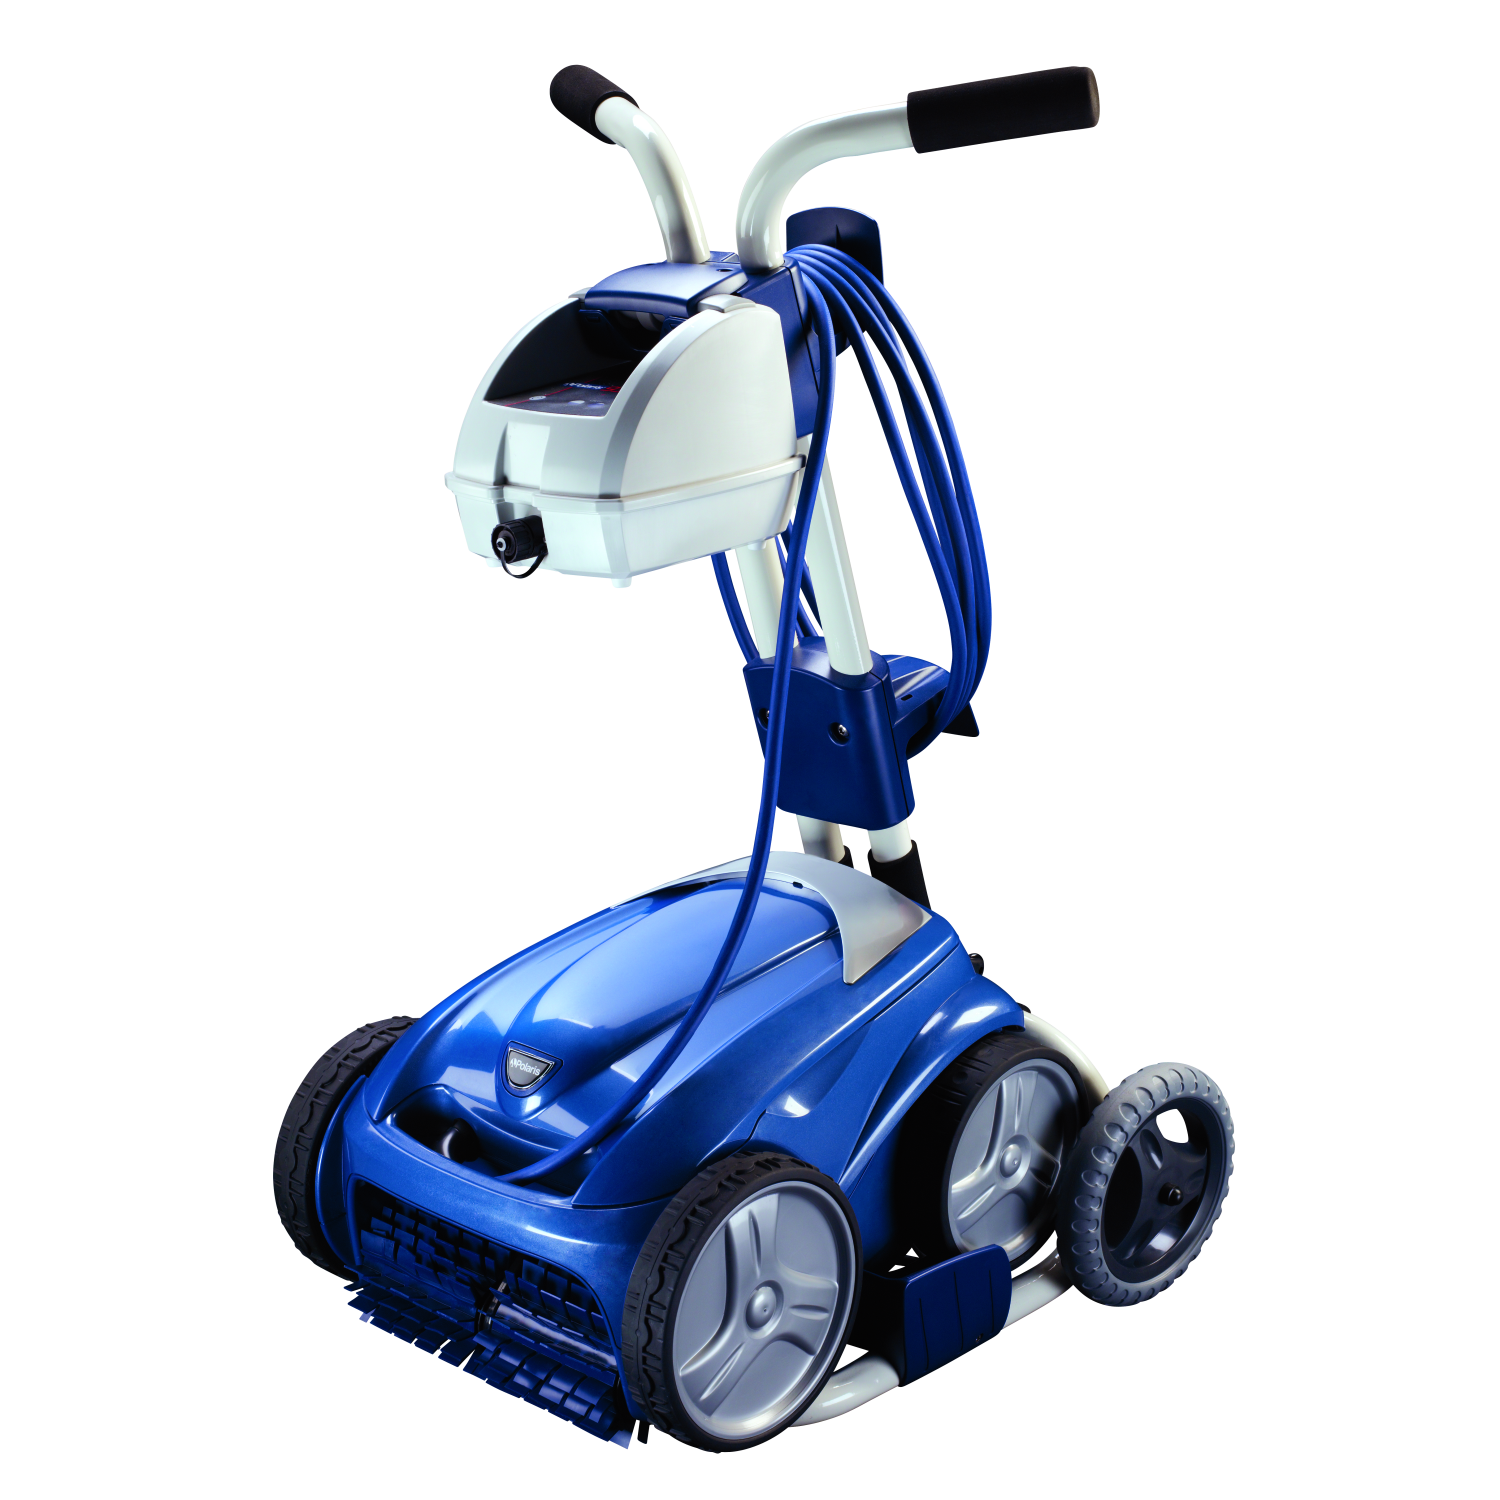 Polaris 9300 | #1 Swimming Pool Cleaner Worldwide | Automatic Pool Cleaners